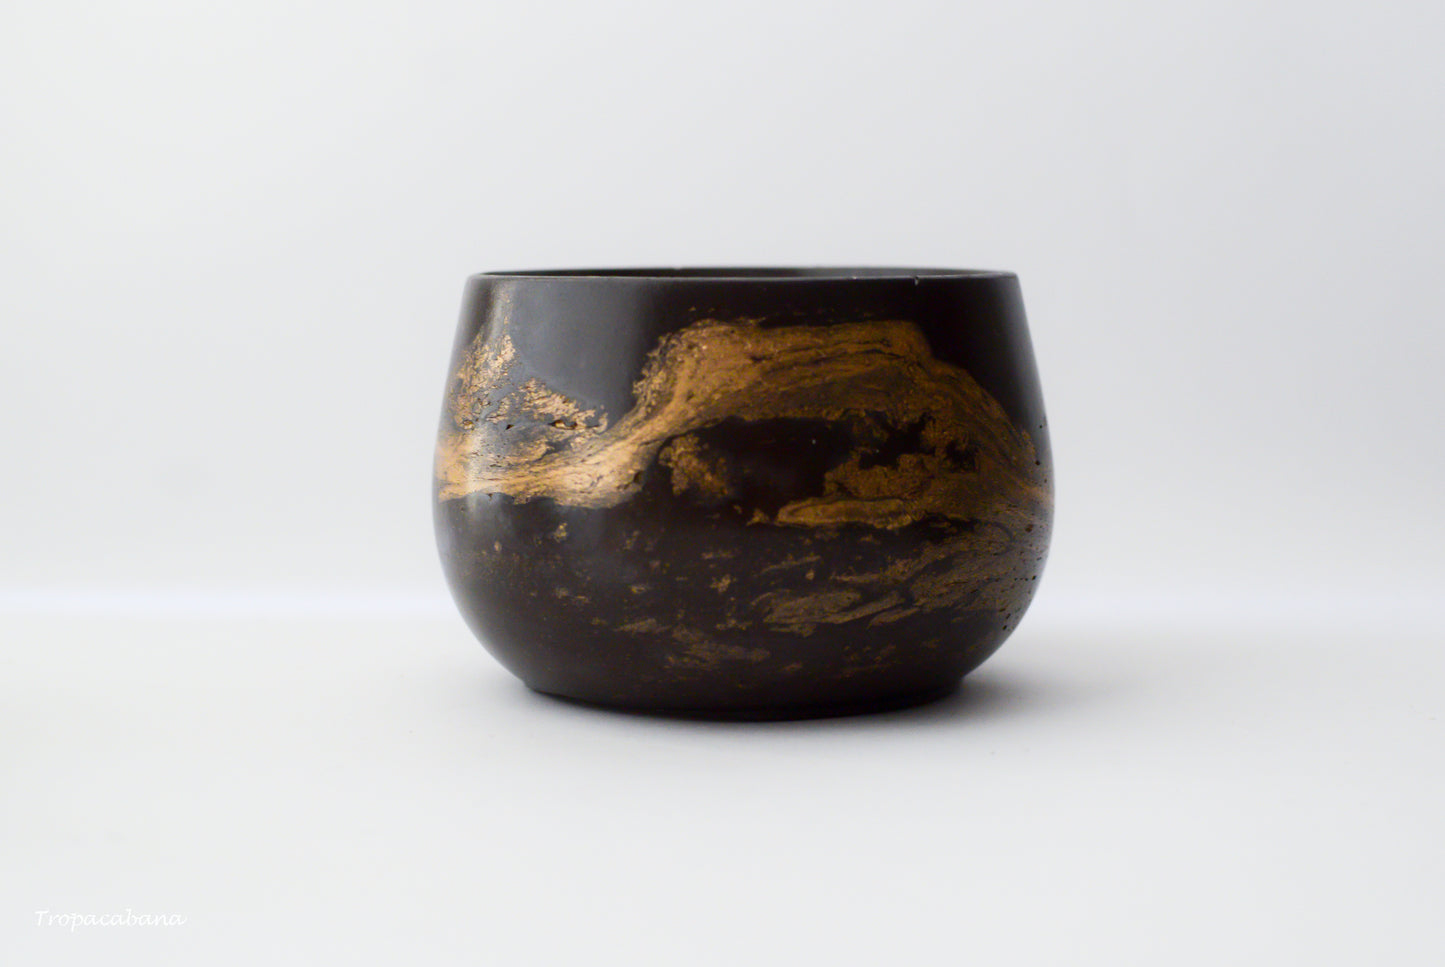 10 oz Handmade Concrete Obsidian Candle, Inspired by the Kilauea Volcano in the big island of Hawaii, in black and golden patterns, smells fruity, floral, beachy and smokey, made with coconut wax, vegan candle, luxury candle, TropaCabana.